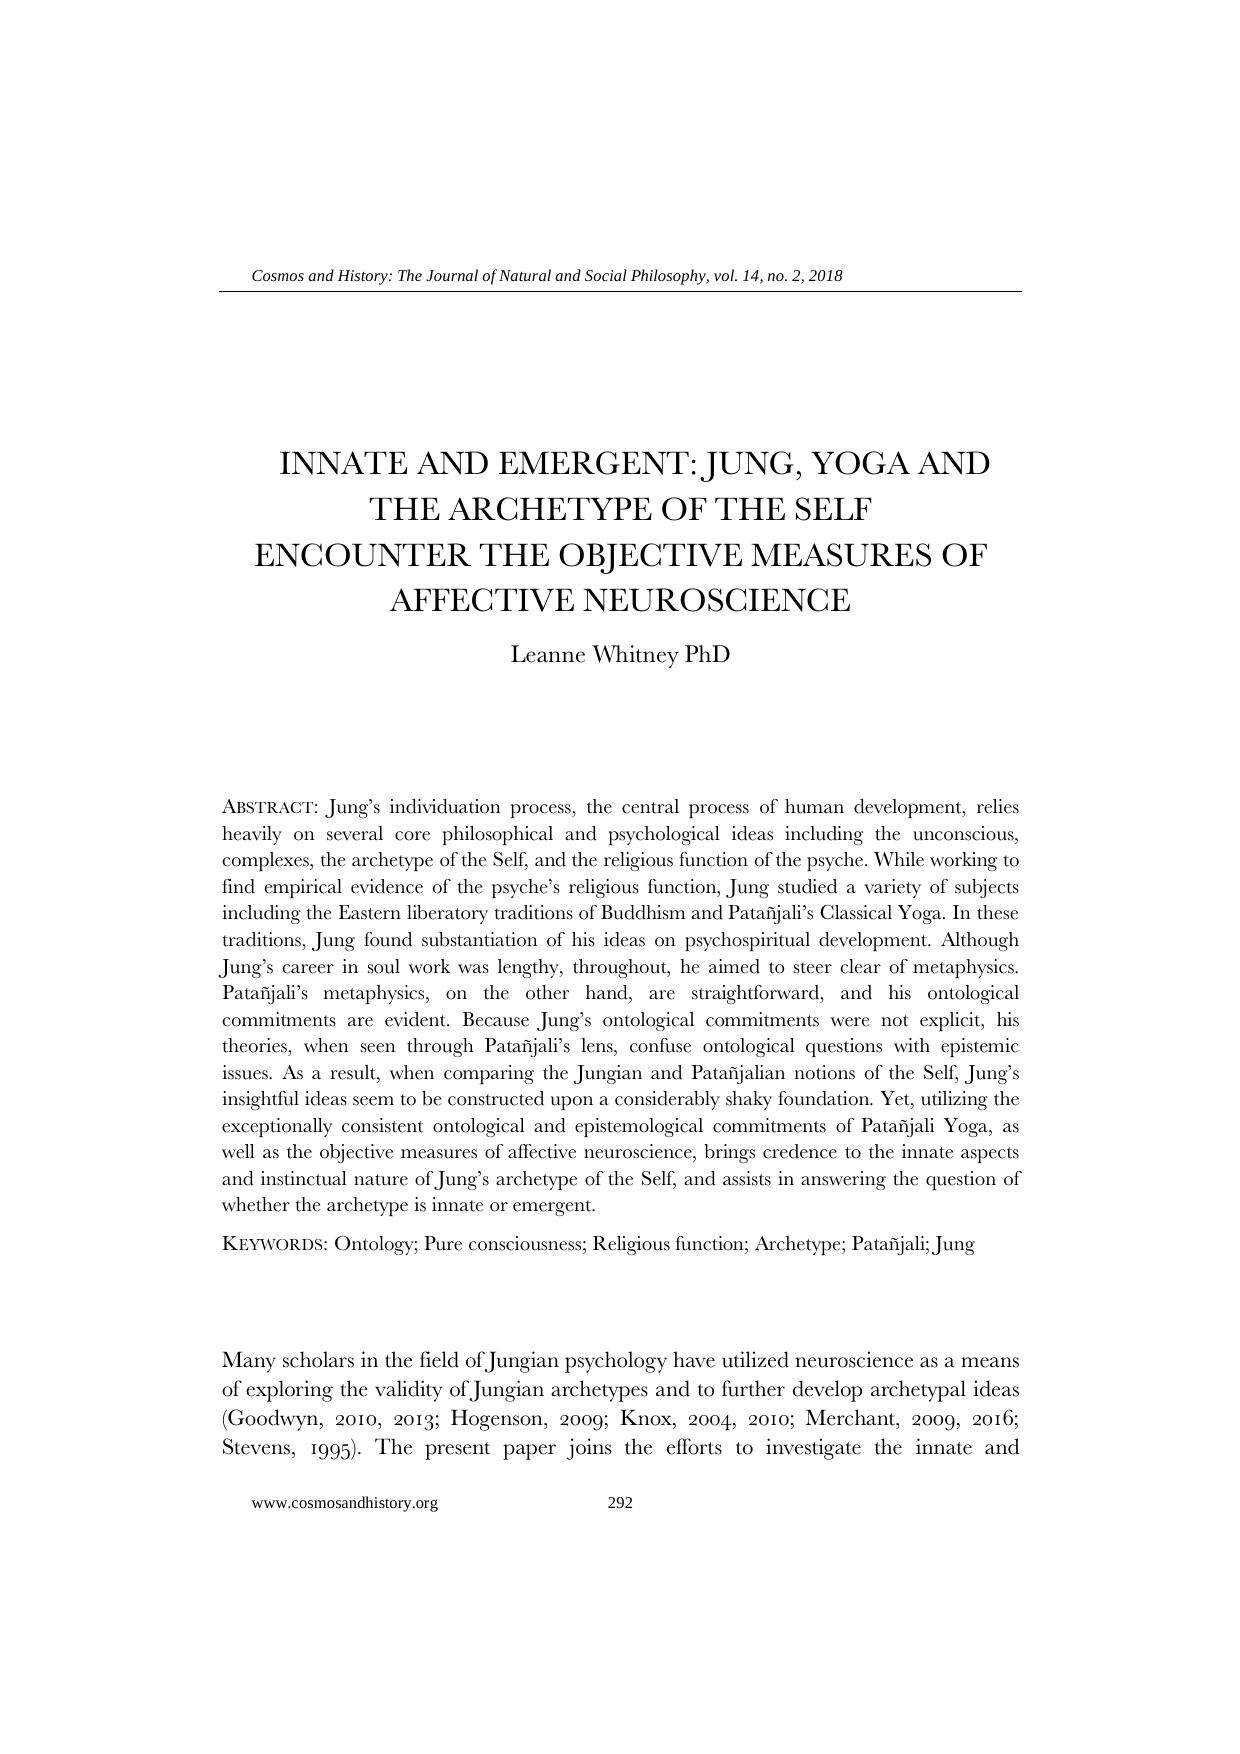 Innate and Emergent: Jung, Yoga and the Archetype of the Self Encounter the Objective Measures of Affective Neuroscience